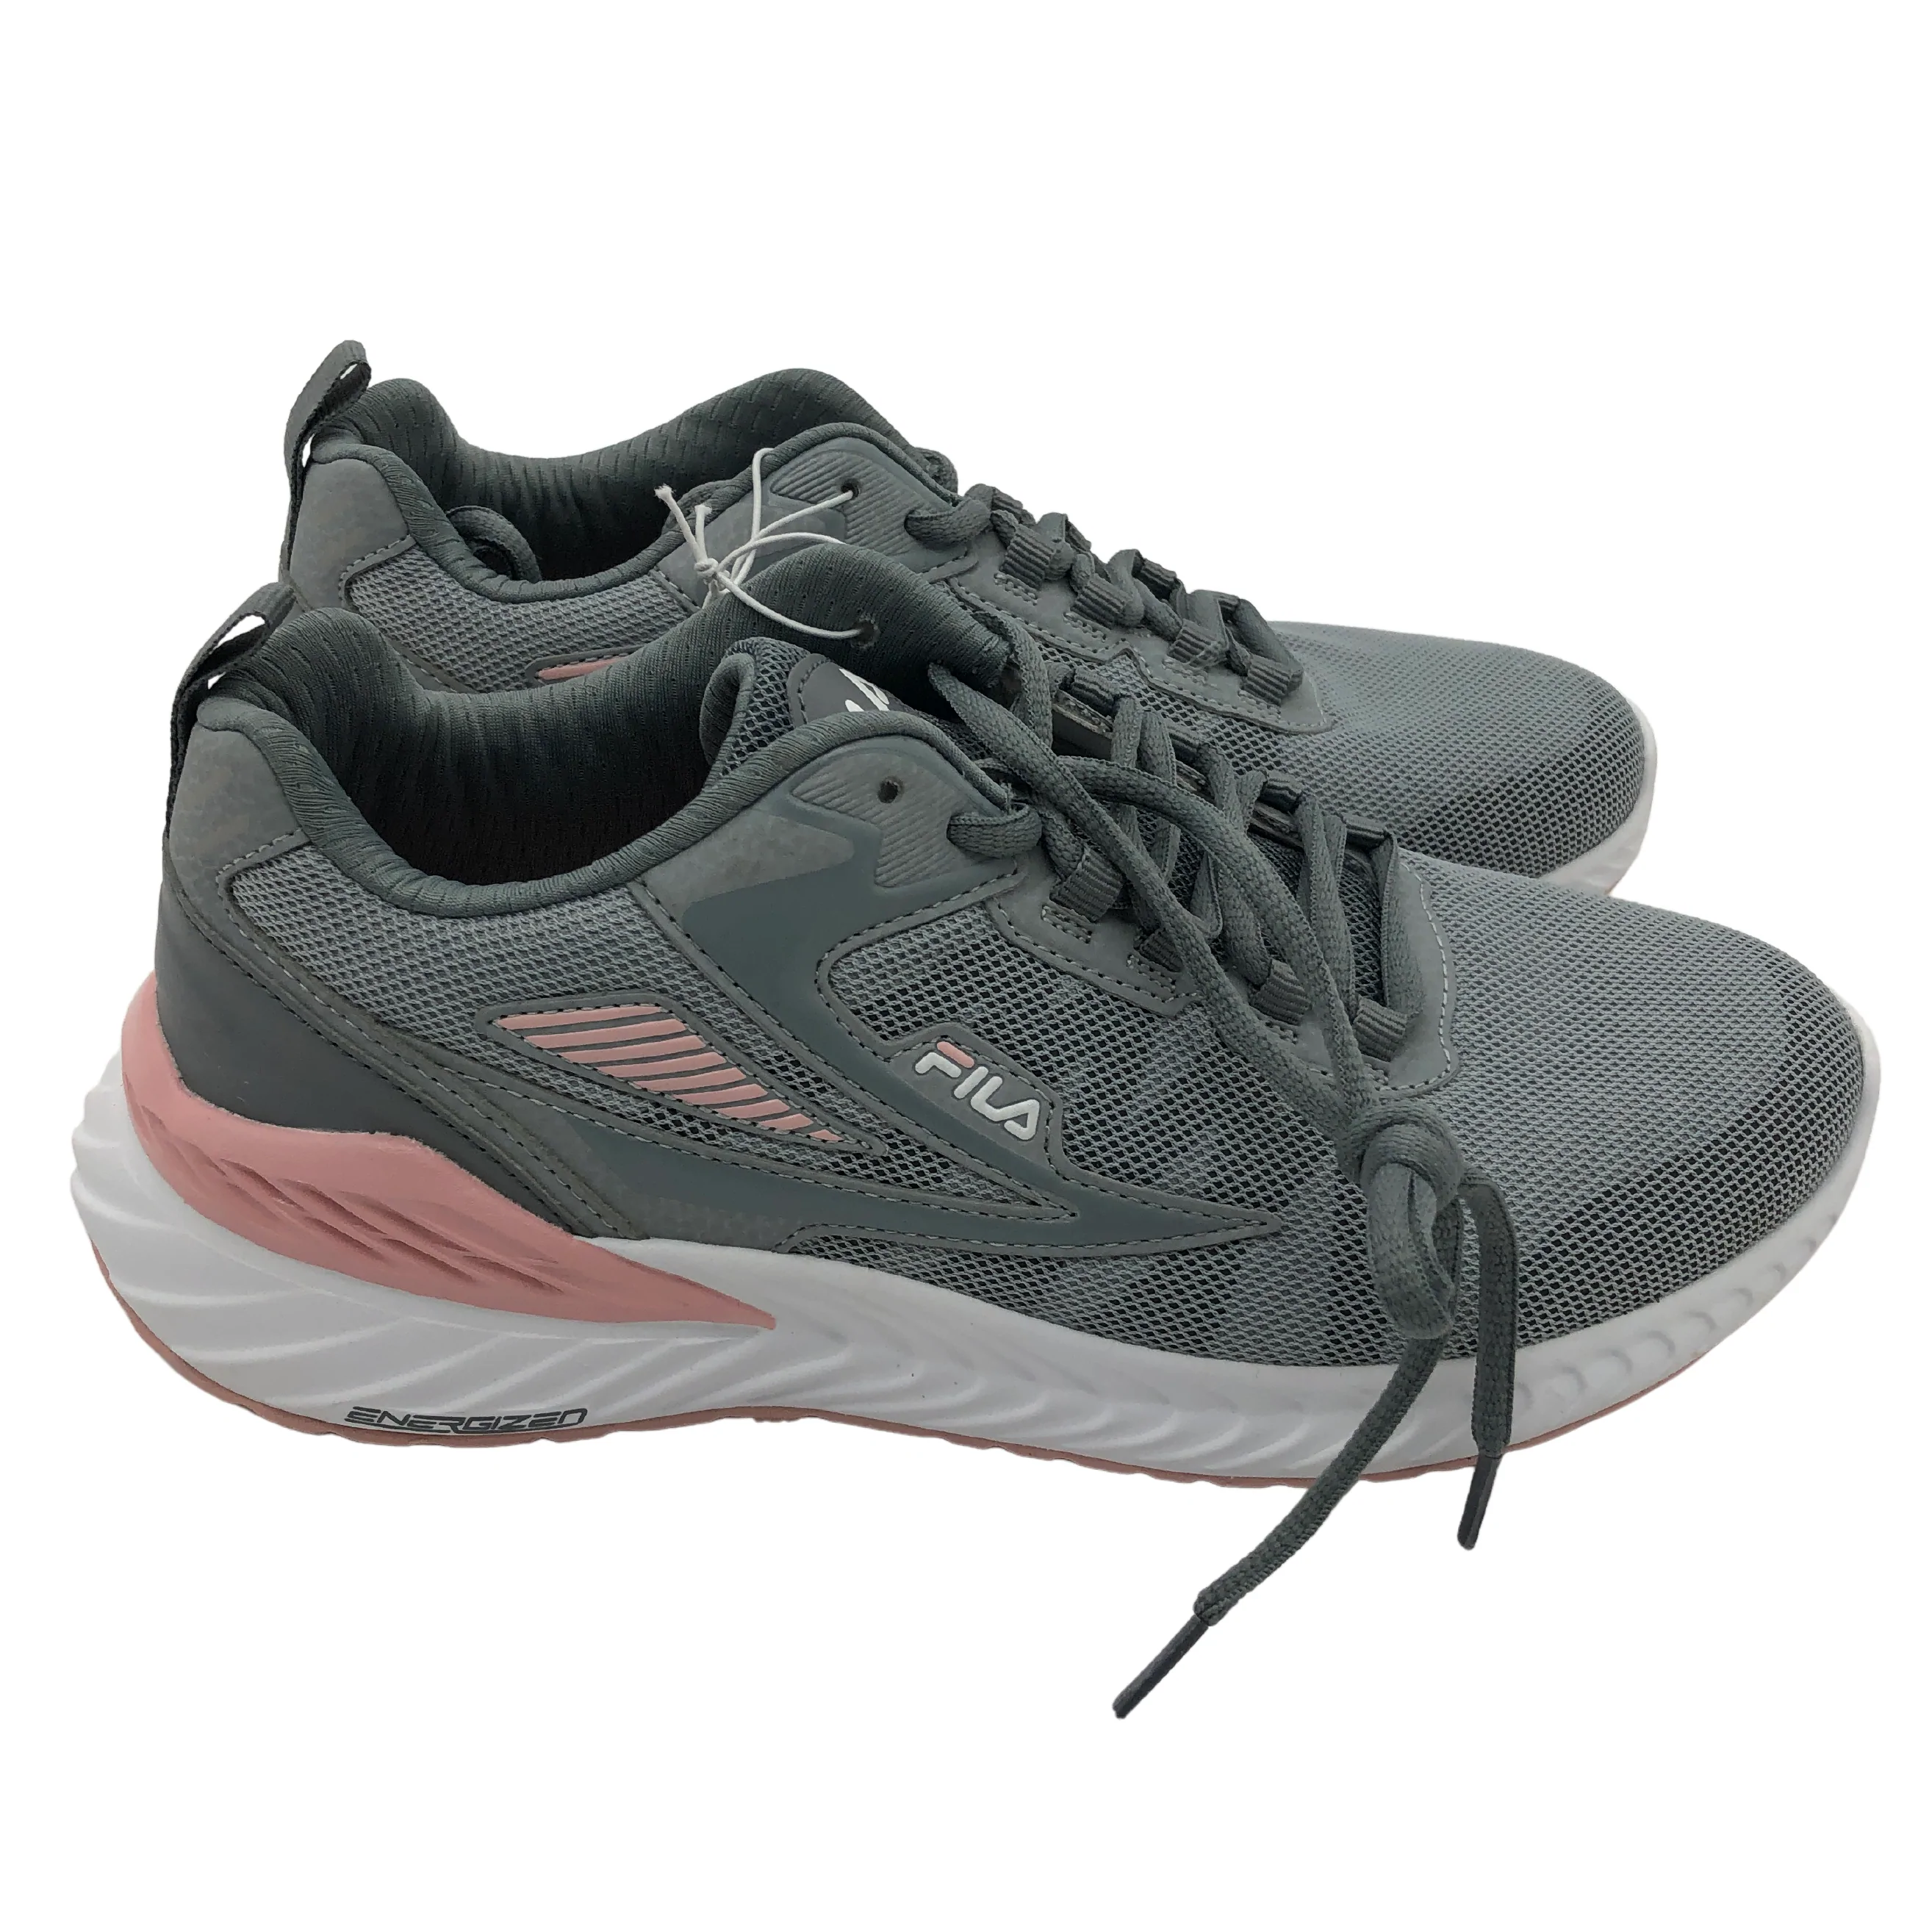 Fila Women's Running Shoes / Trazoros Energized 2 / Grey & Pink / Size 10 **No Tags**